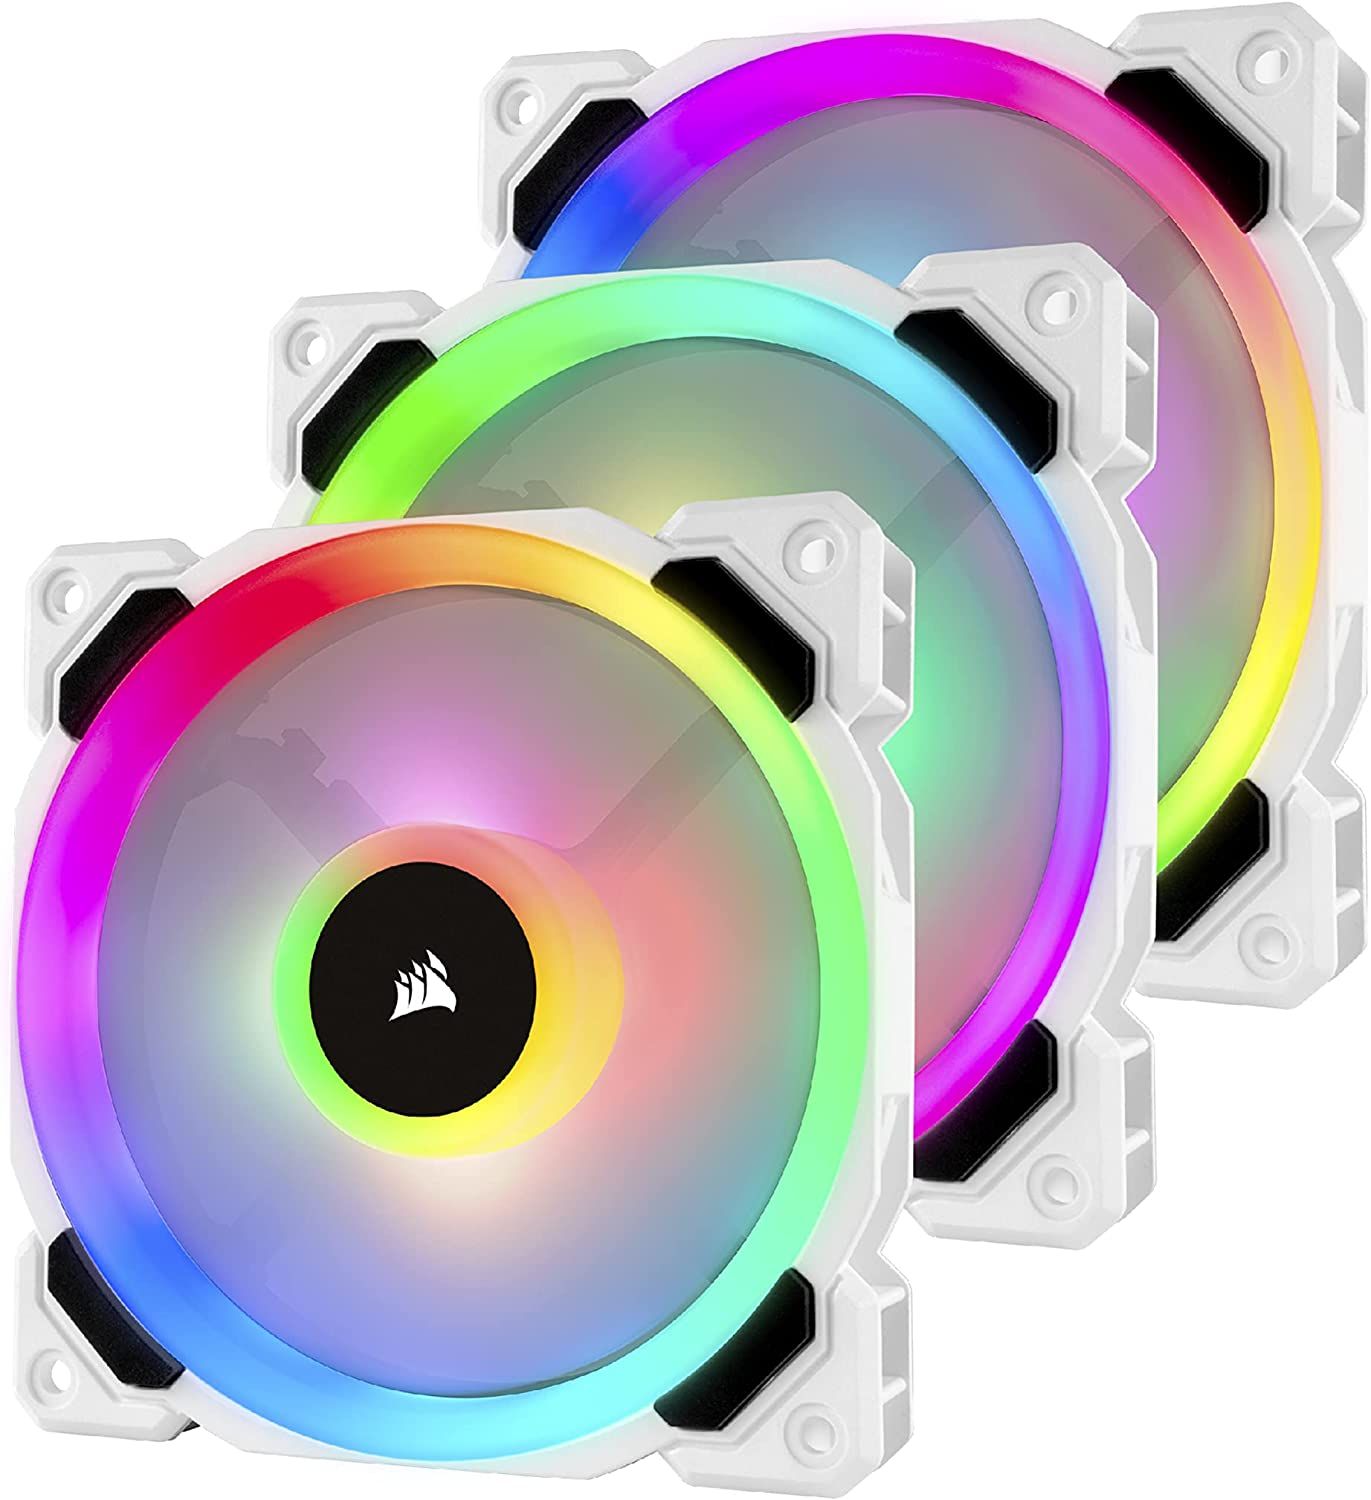 The Case Fans For Your PC 2023